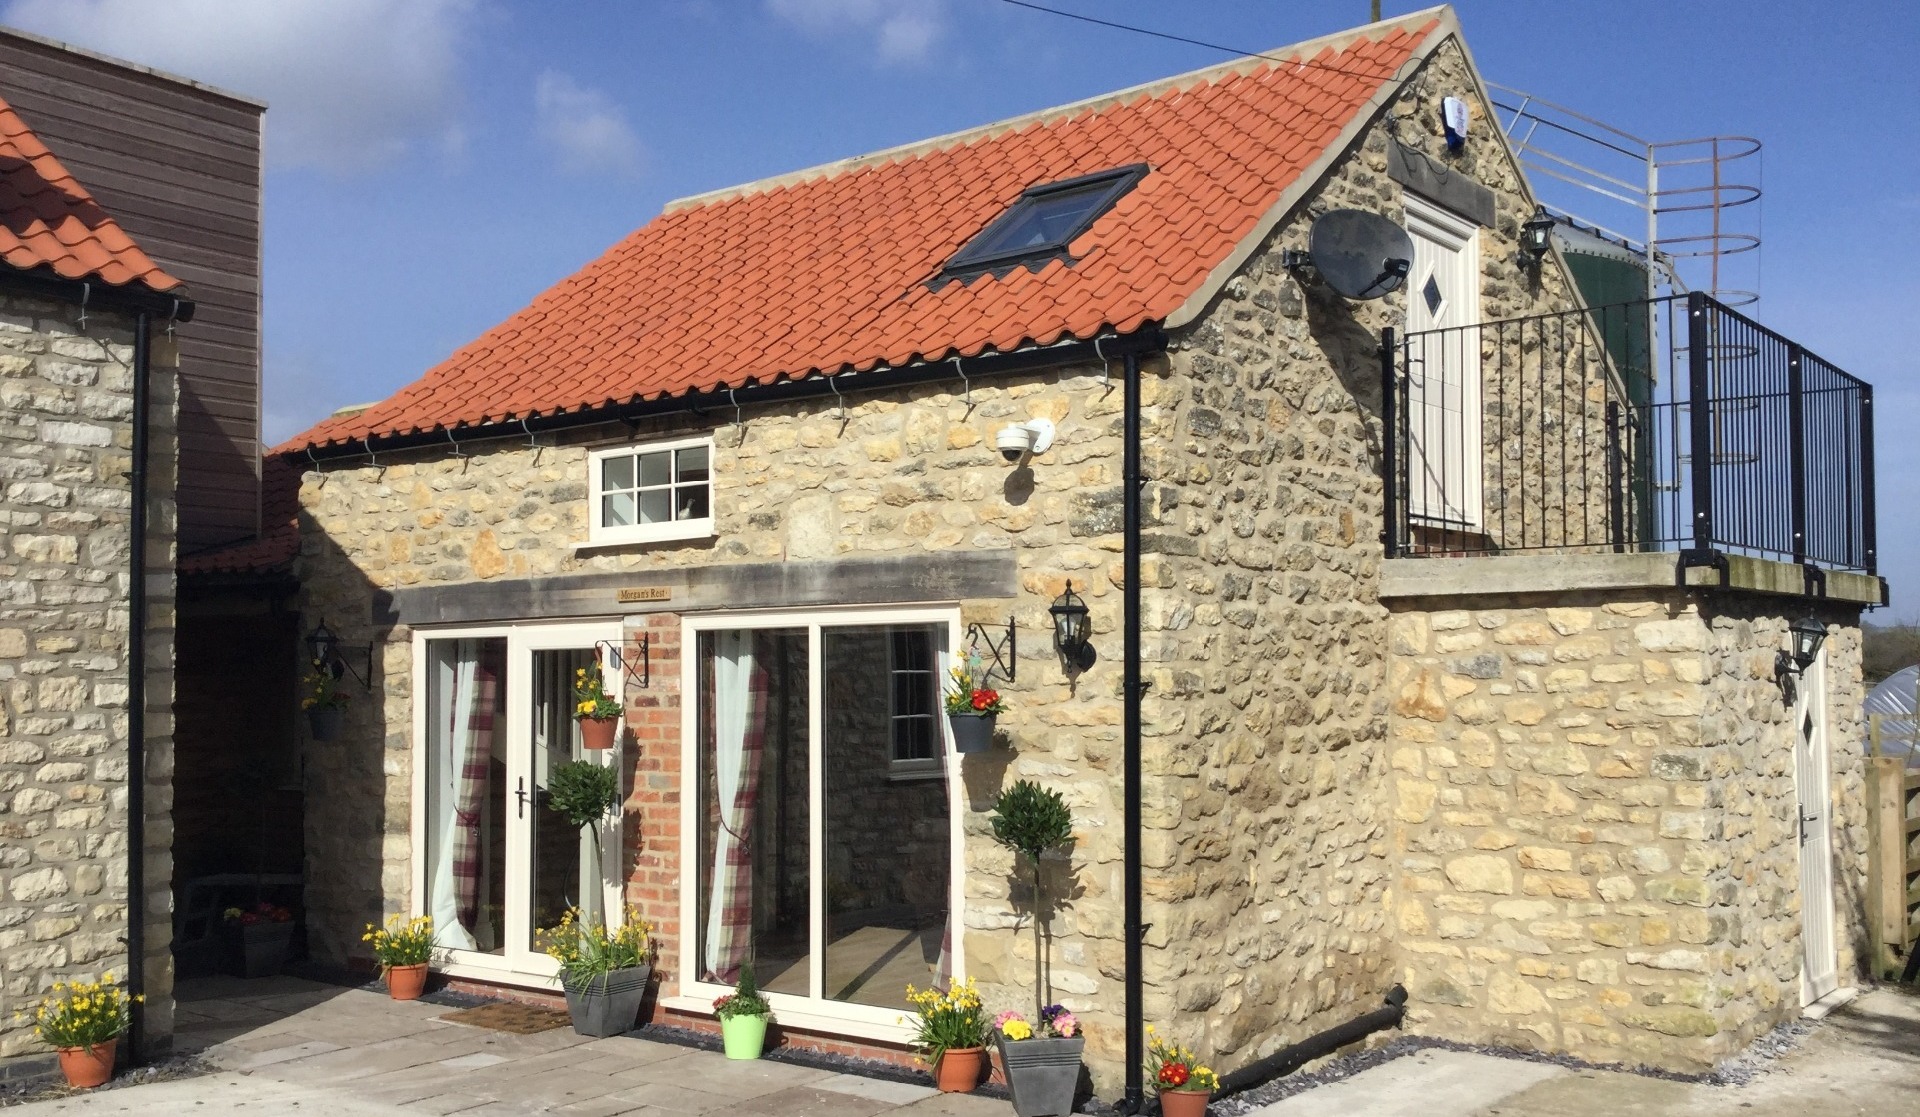 Ston holiday cottage with two sets of patio doors, a small window above and a red tiled roof with velux window. Beige upstairs door with balcony and black railings